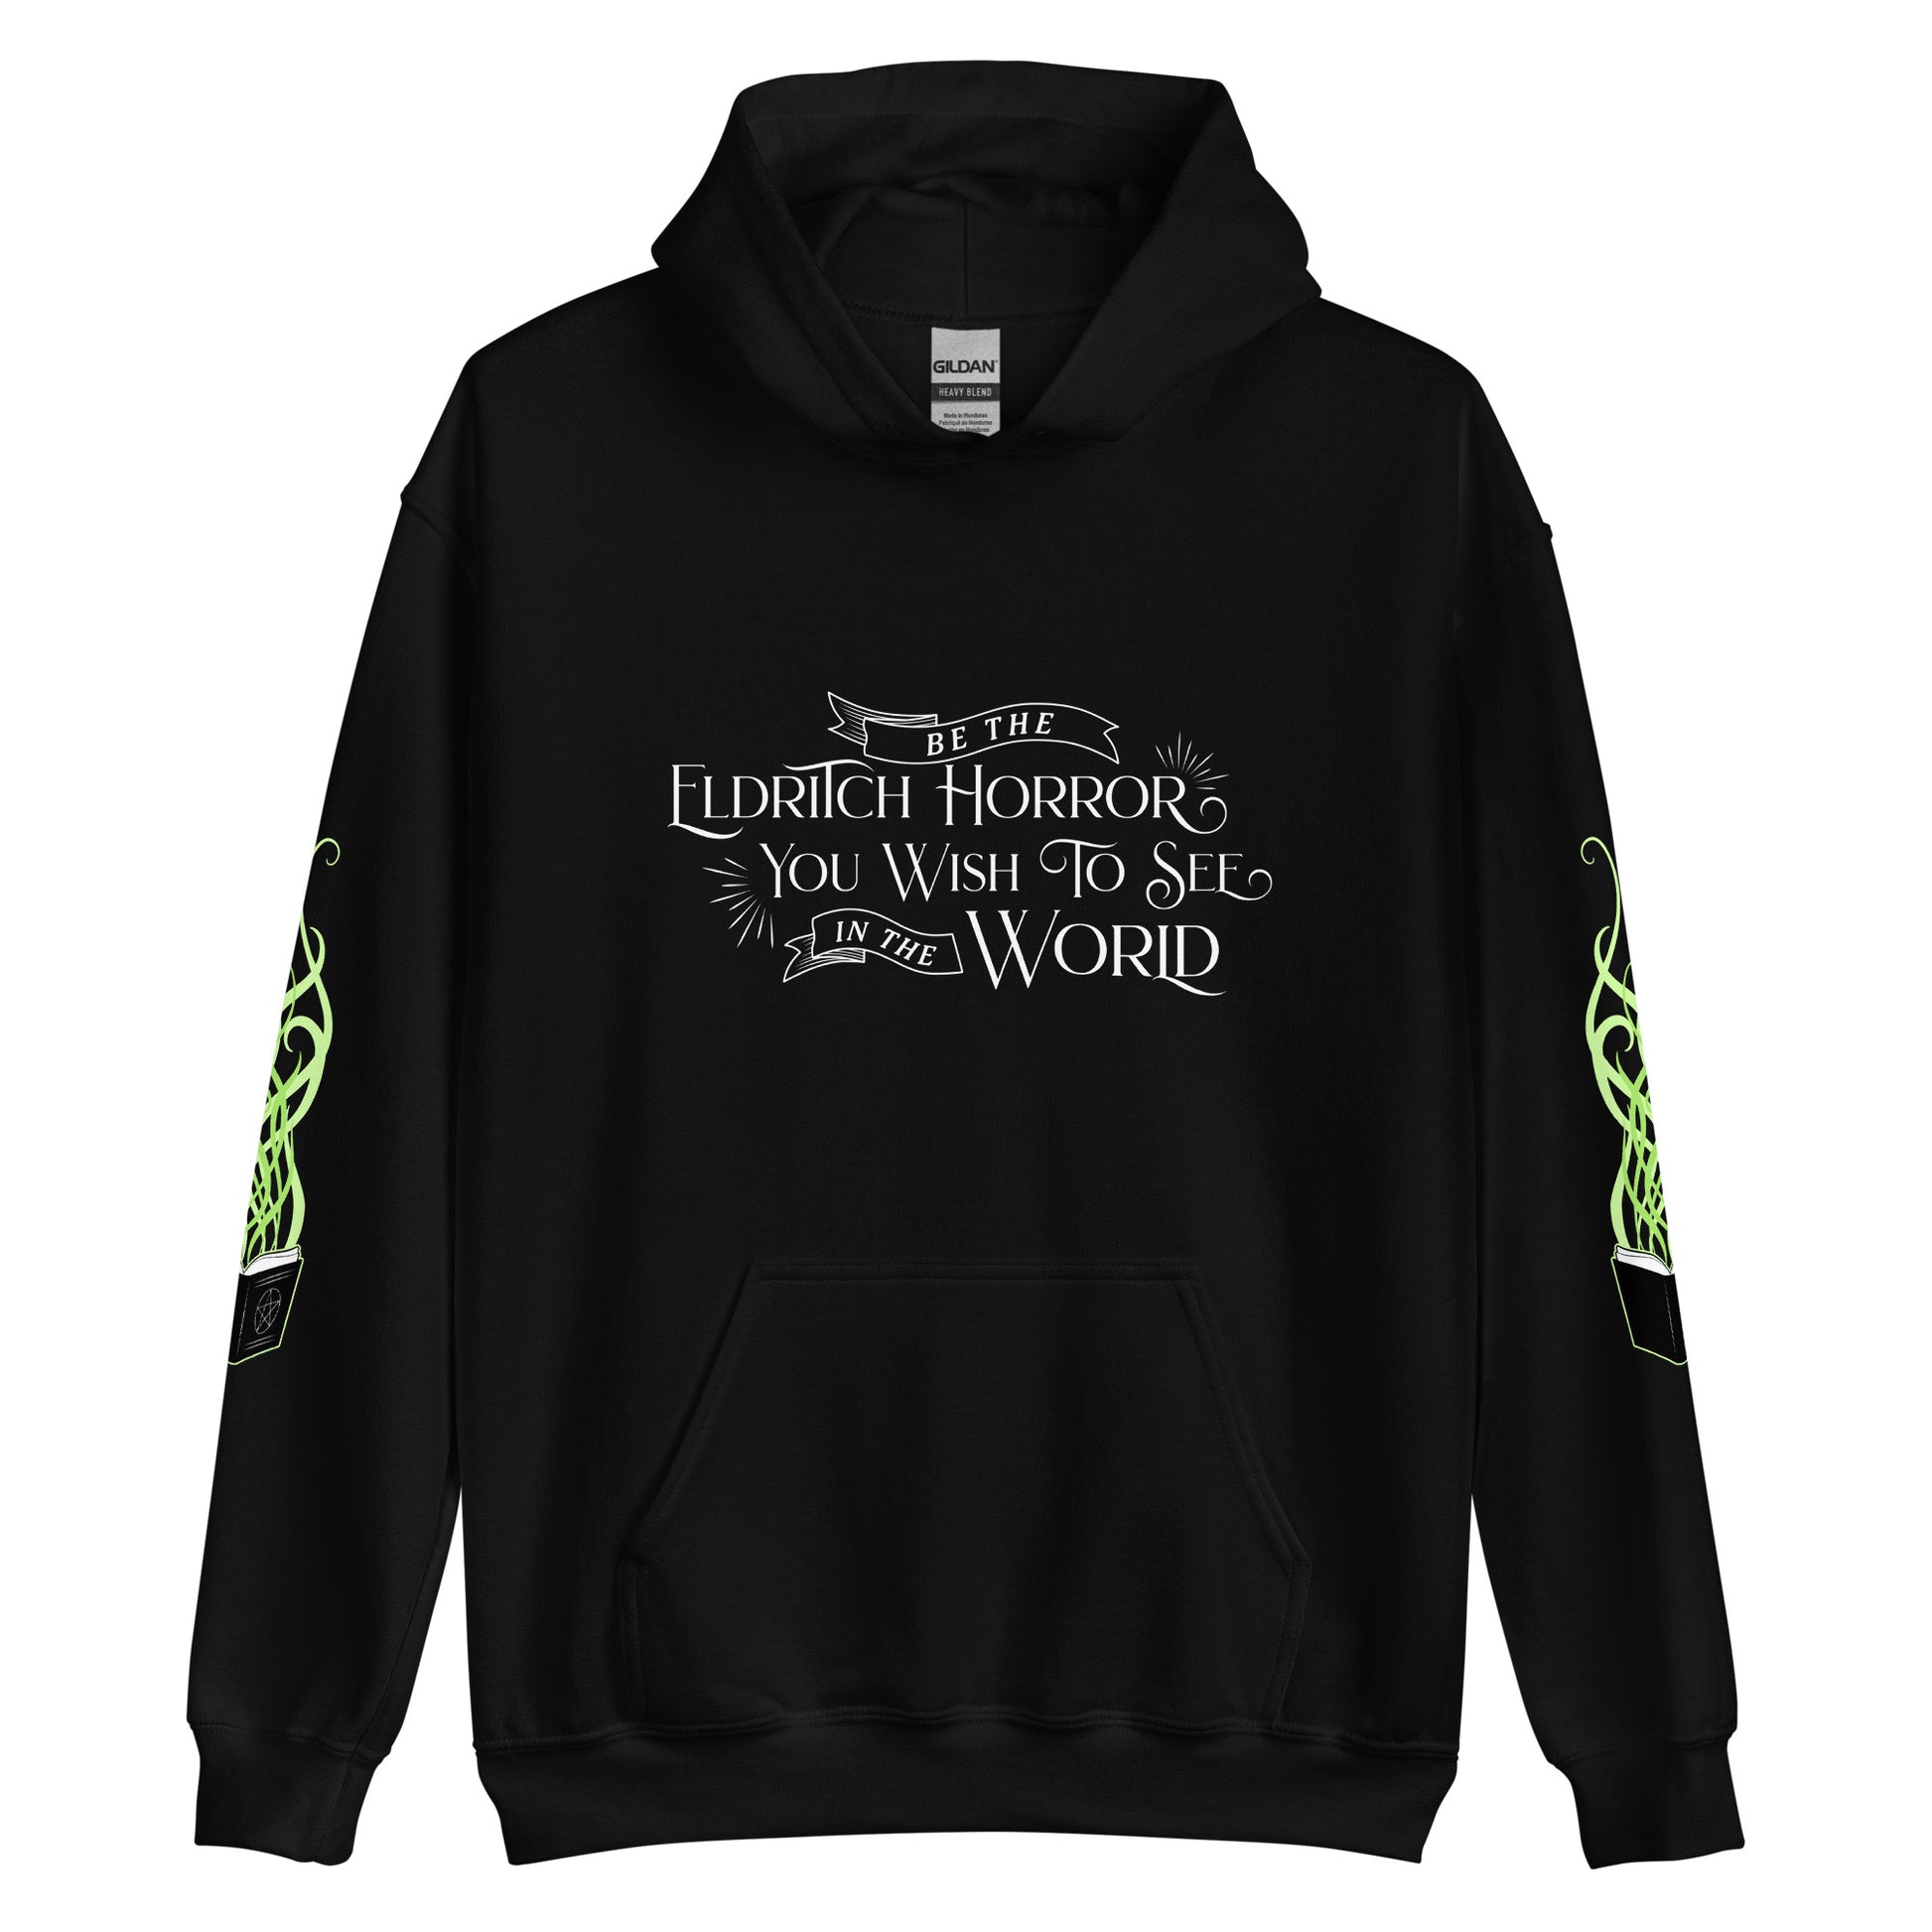 A black hooded sweatshirt featuring white text in an old-fashioned style on the chest. The text reads "Be the Eldritch Horror You Wish To See In The World". On each sleeve is an illustration of a black spellbook with green magical tendrils reaching upward from the pages.